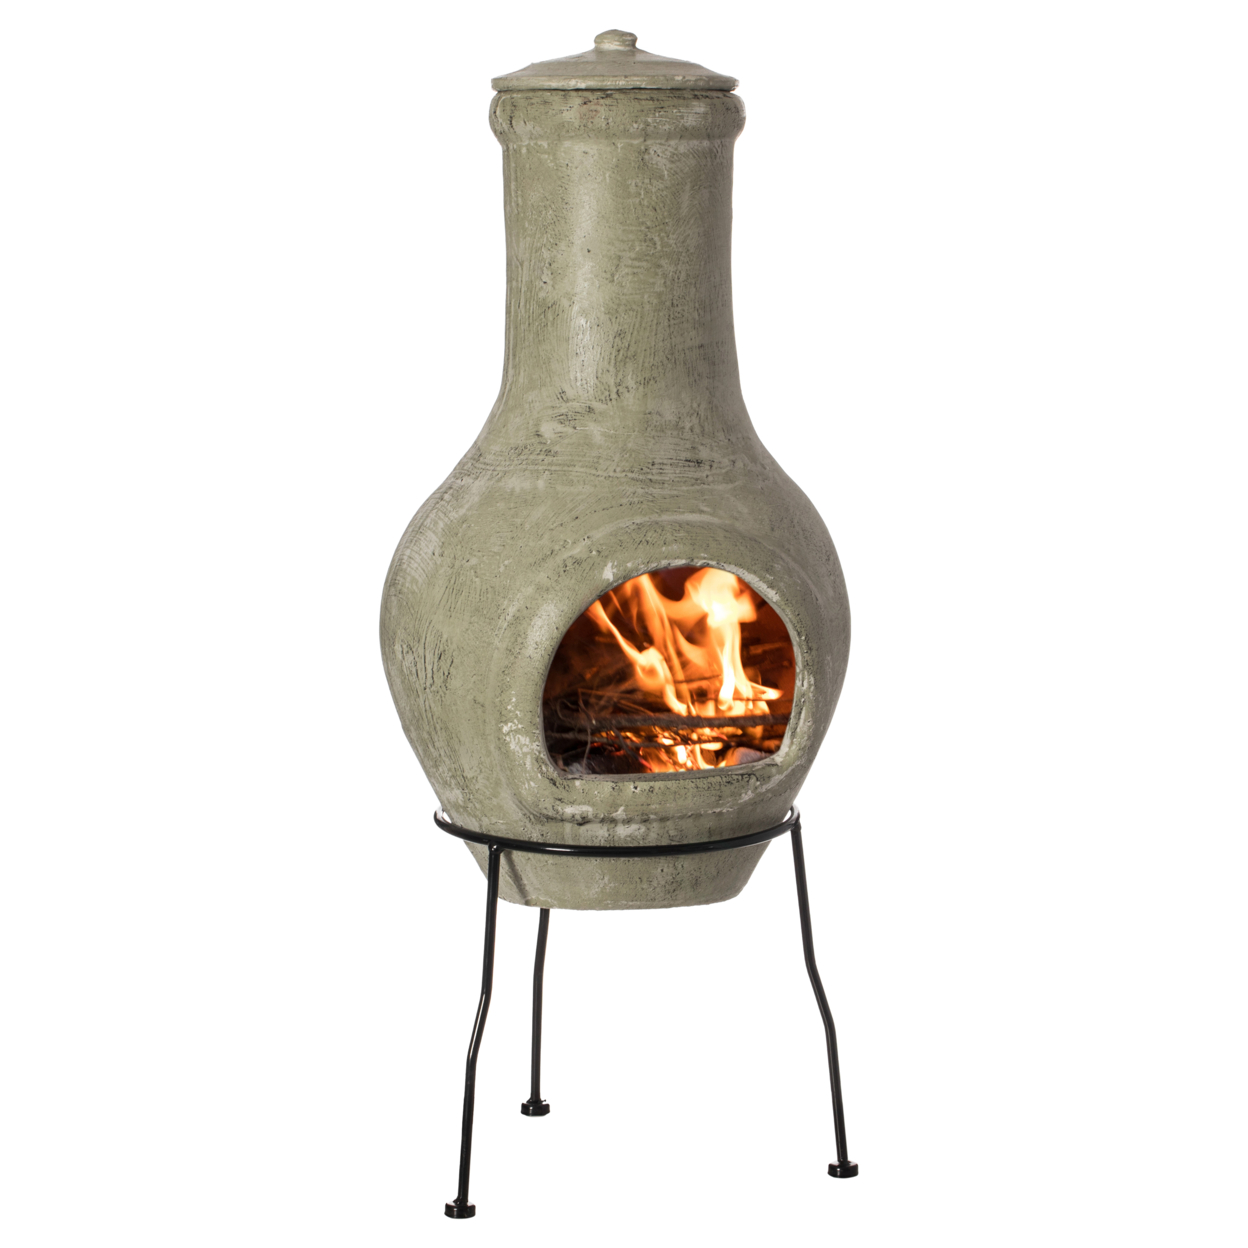 Beige Outdoor Clay Chiminea Outdoor Fireplace Scribbled Design Charcoal Burning Fire Pit With Sturdy Metal Stand, Barbecue, Cocktail Party